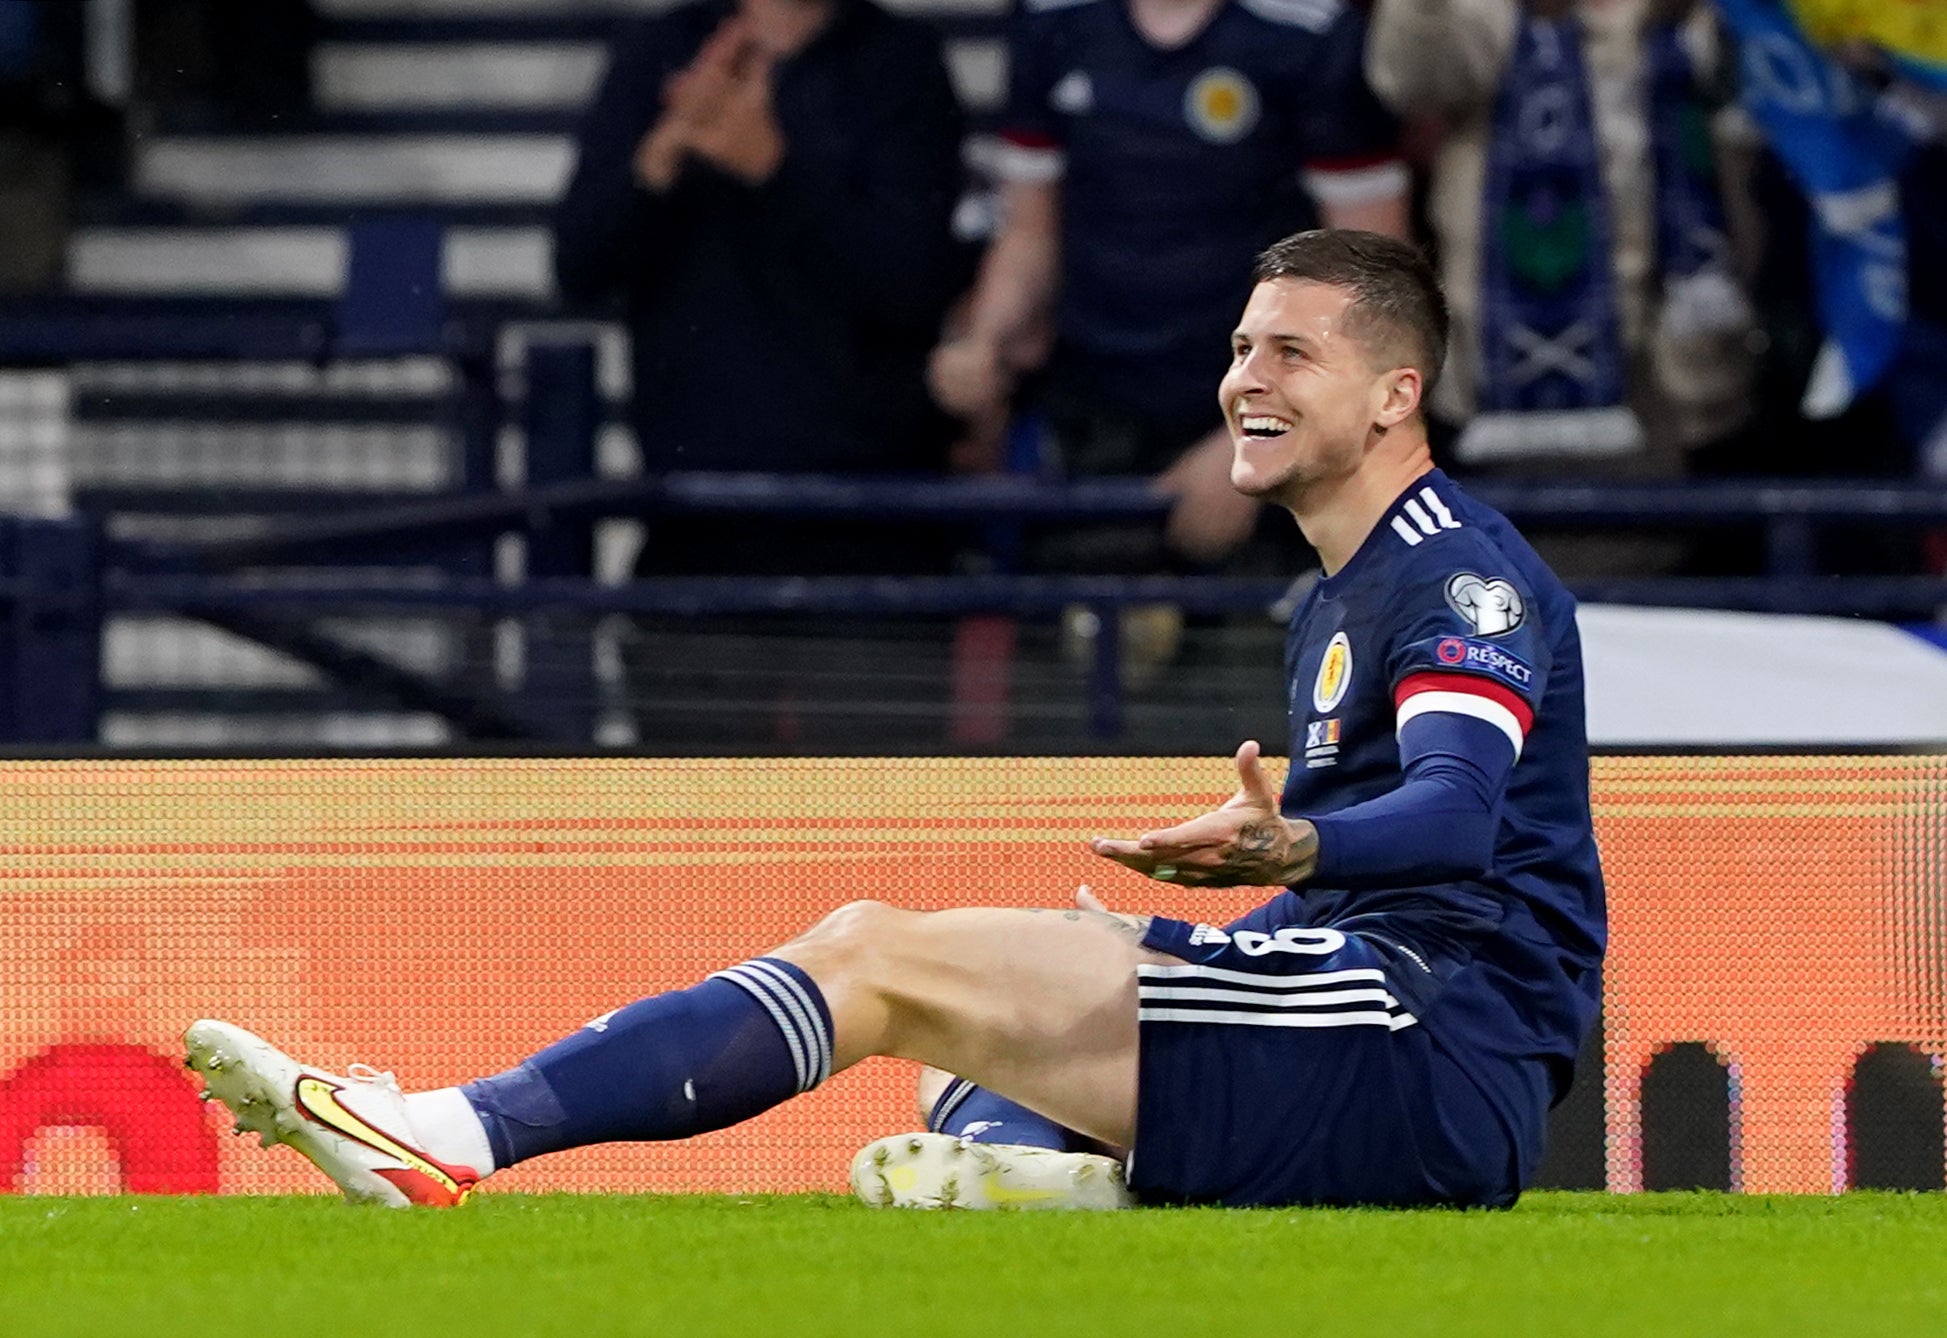 Lyndon Dykes scored the only goal in Scotland’s win against Moldova (ANdrew Milligan/PA)